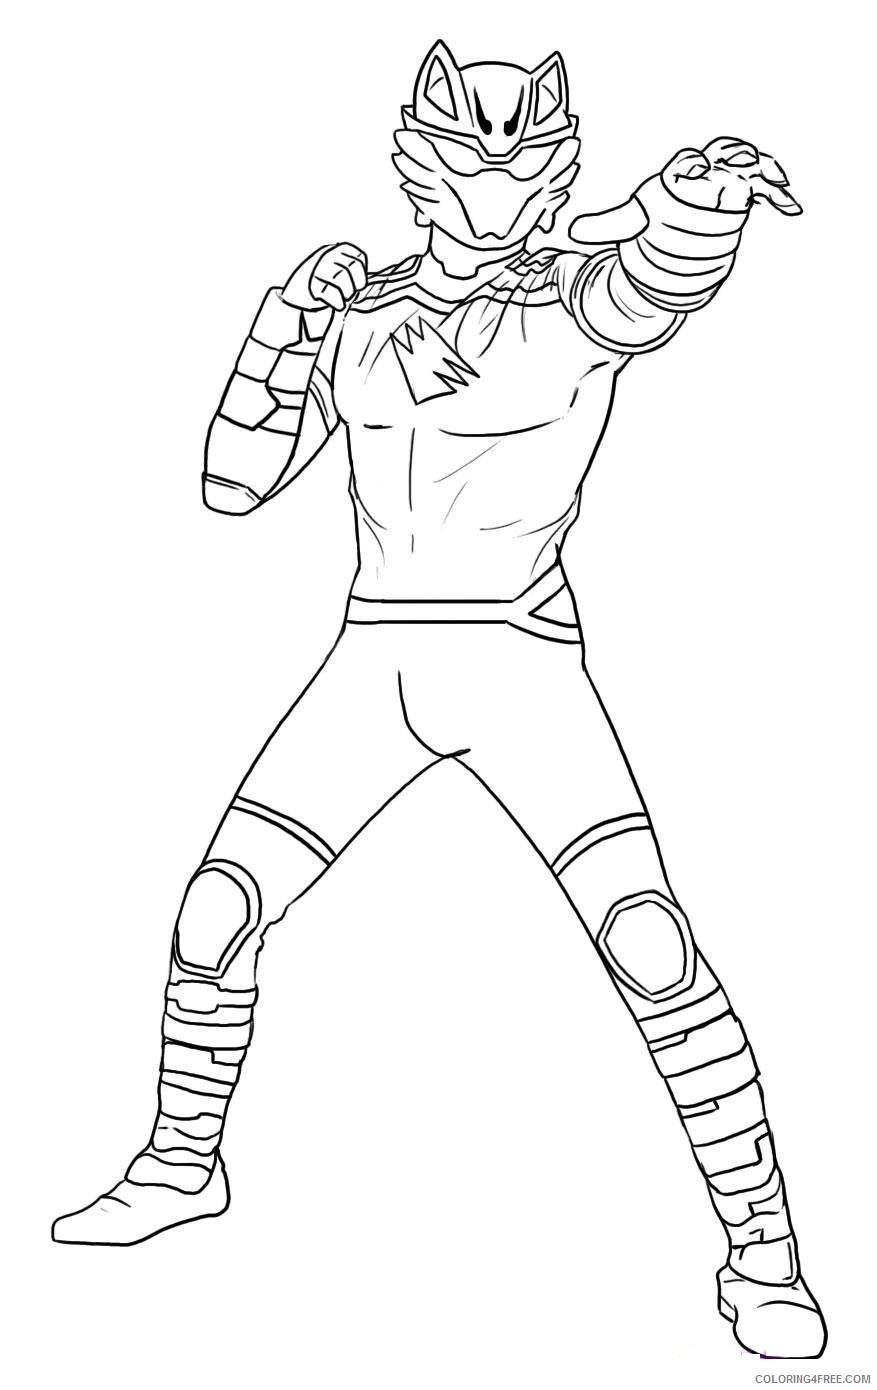 Power Rangers Coloring Pages TV Film Dino Thunder Printable 2020 06841 Coloring4free